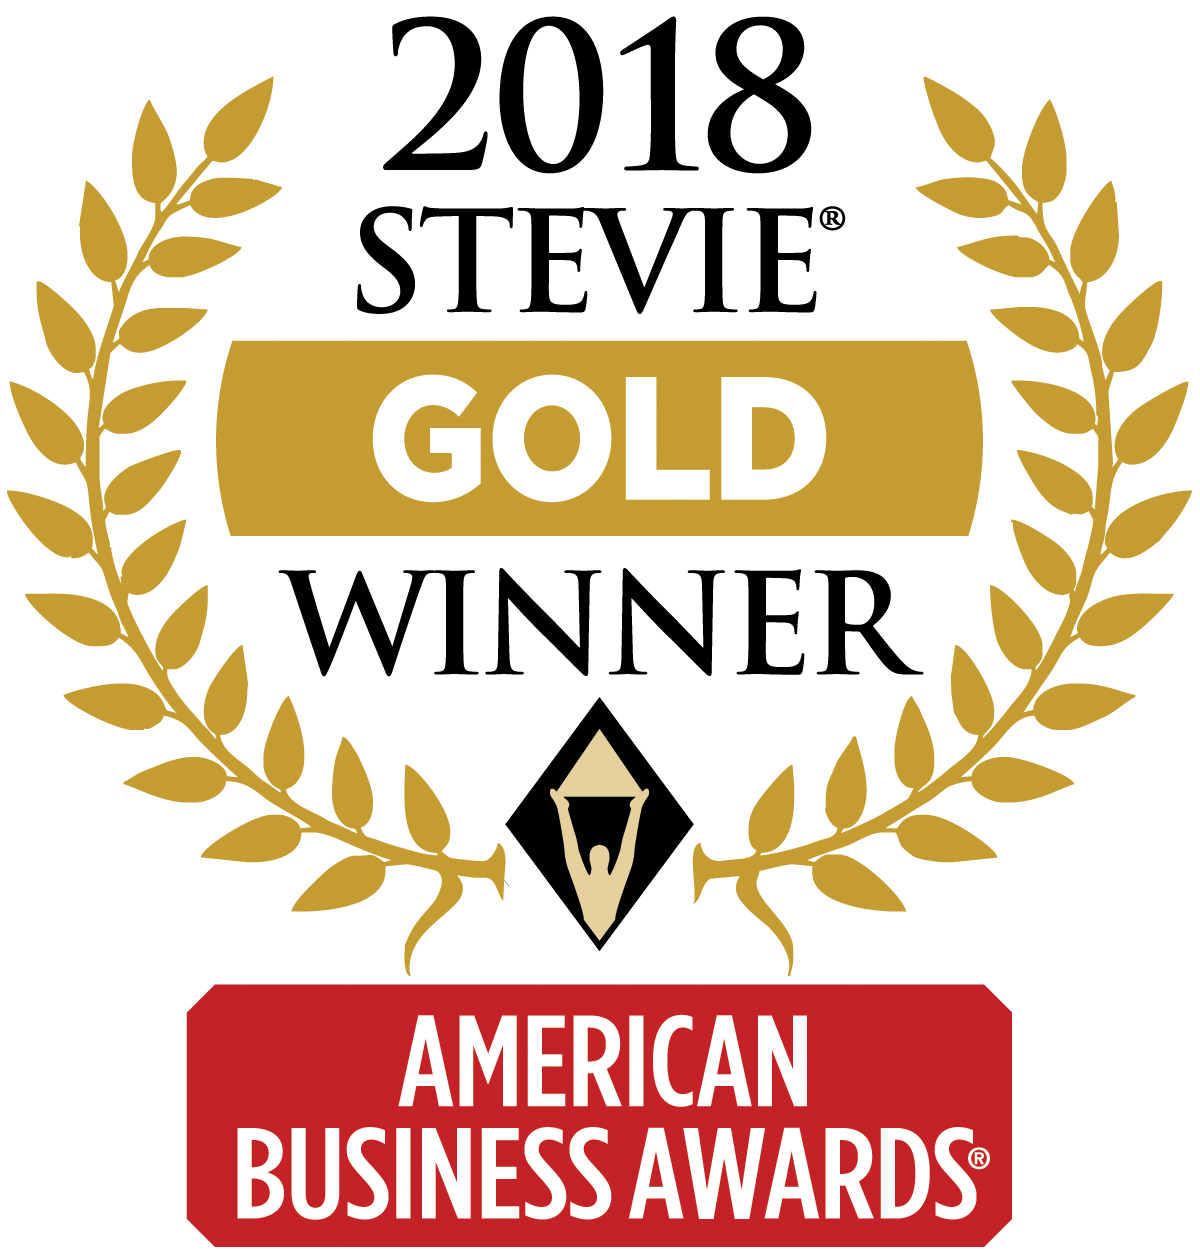 The American Business Awards Gold Stevie